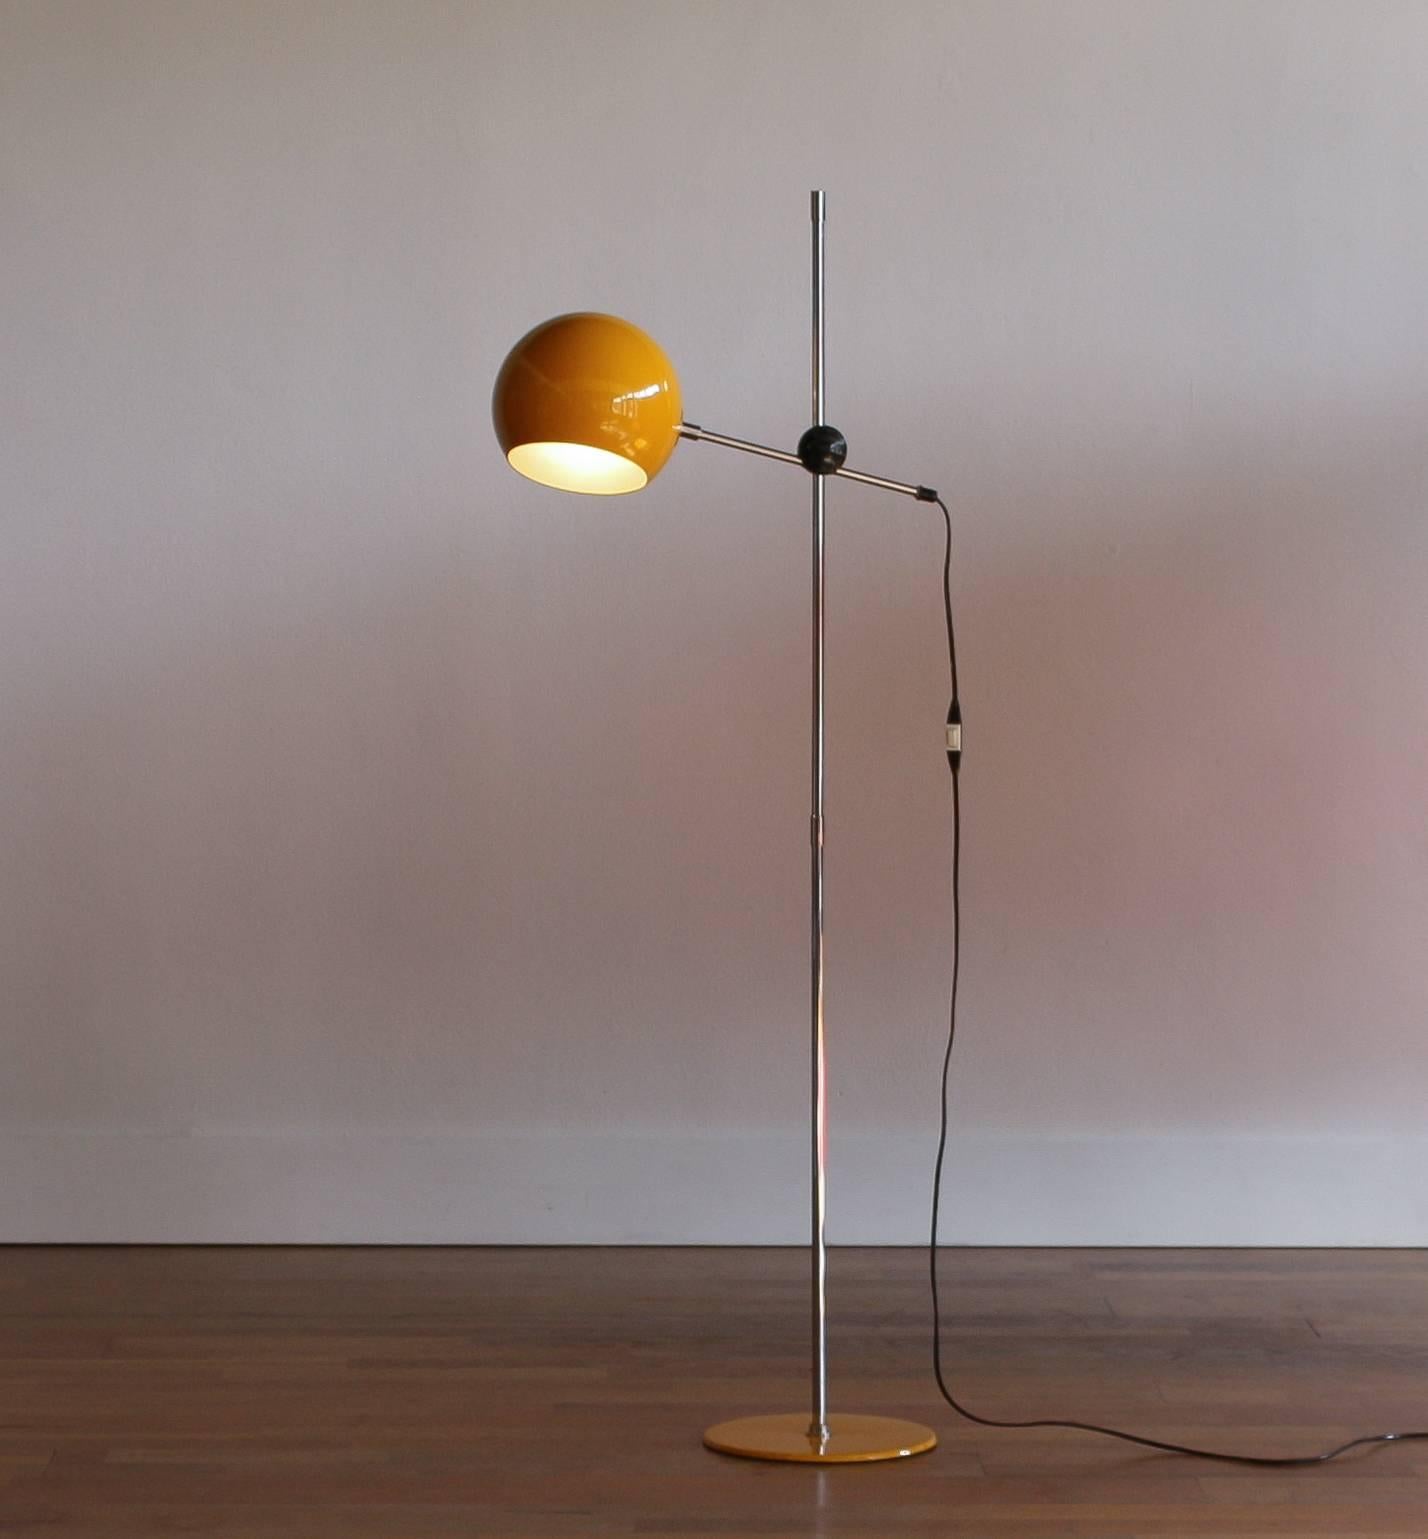 Typical 1970s floor lamp created by Hemi Klot Sweden.
This lamp has a yellow boll that adjustable and rotatable.
The stand is placed on a yellow floor plate.
Nice combination yellow with chrome.
In good vintage condition.
Measures: Height 129